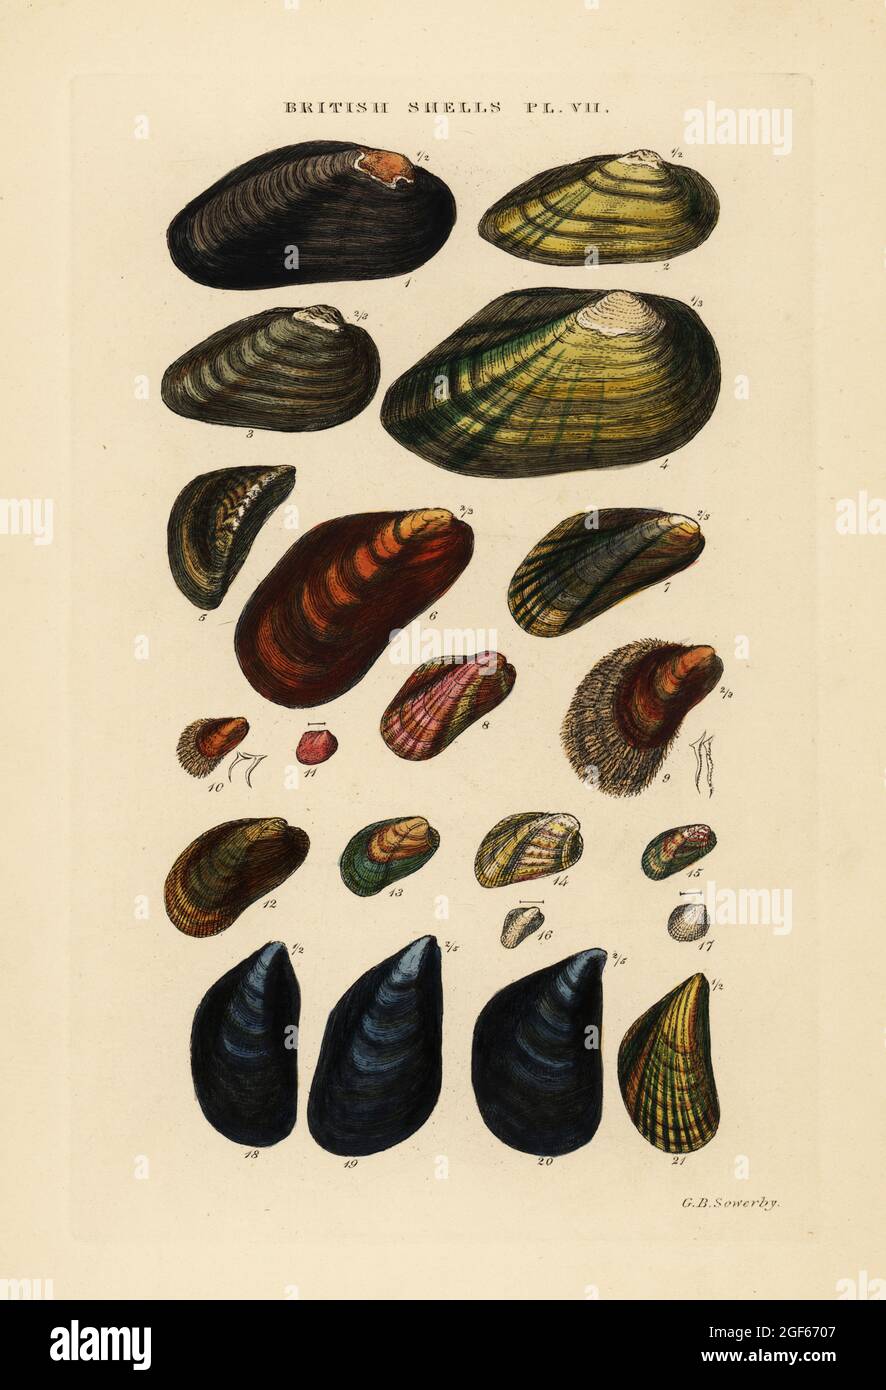 Freshwater mussels, Unio, Anodon, and marine mussels, Modiola, Crenella, Mytilus, Dreissina, etc. Handcoloured copperplate engraving by George Brettingham Sowerby from his own Illustrated Index of British Shells, Sowerby and Simpkin, Marshall & Co., London, 1859. George Brettingham Sowerby II (1812-1884), British naturalist, illustrator, and conchologist. Stock Photo